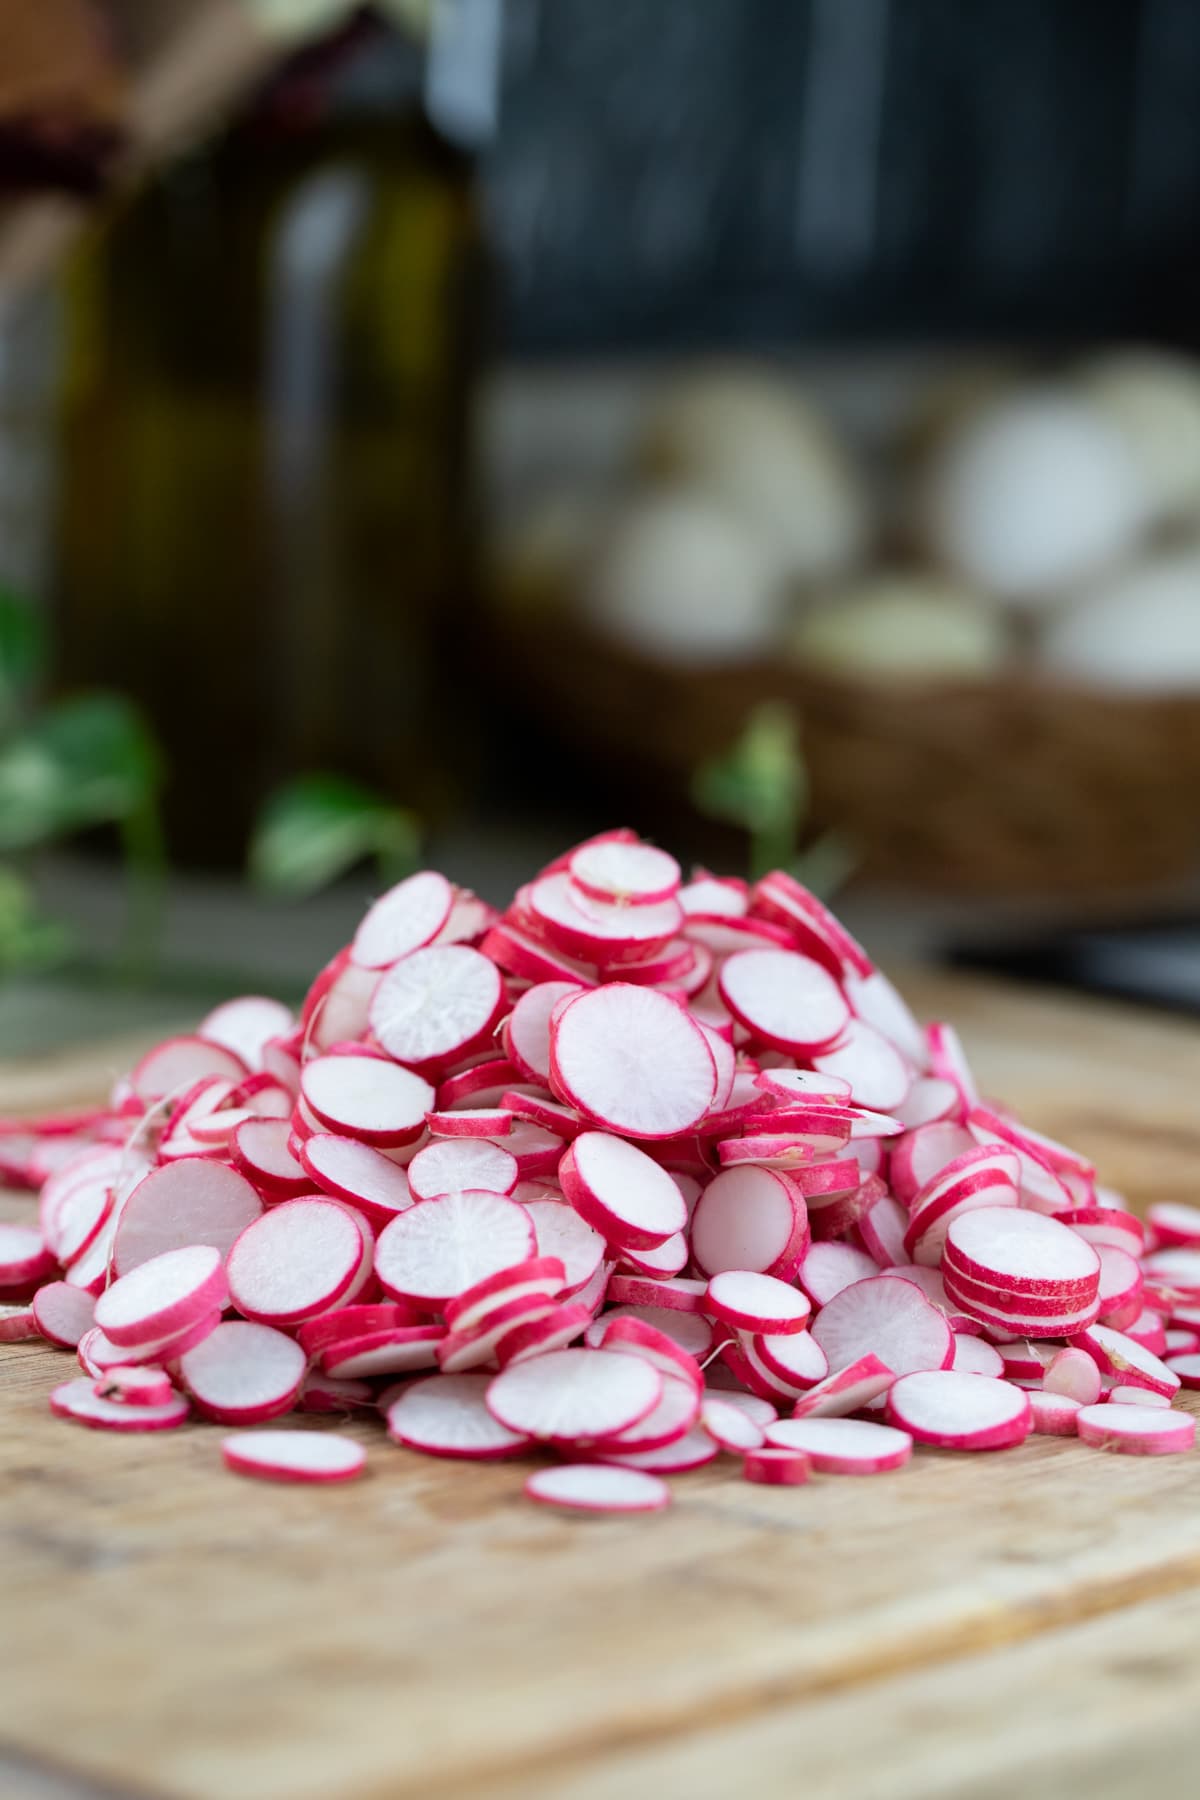 slicing the radishes into thin slices